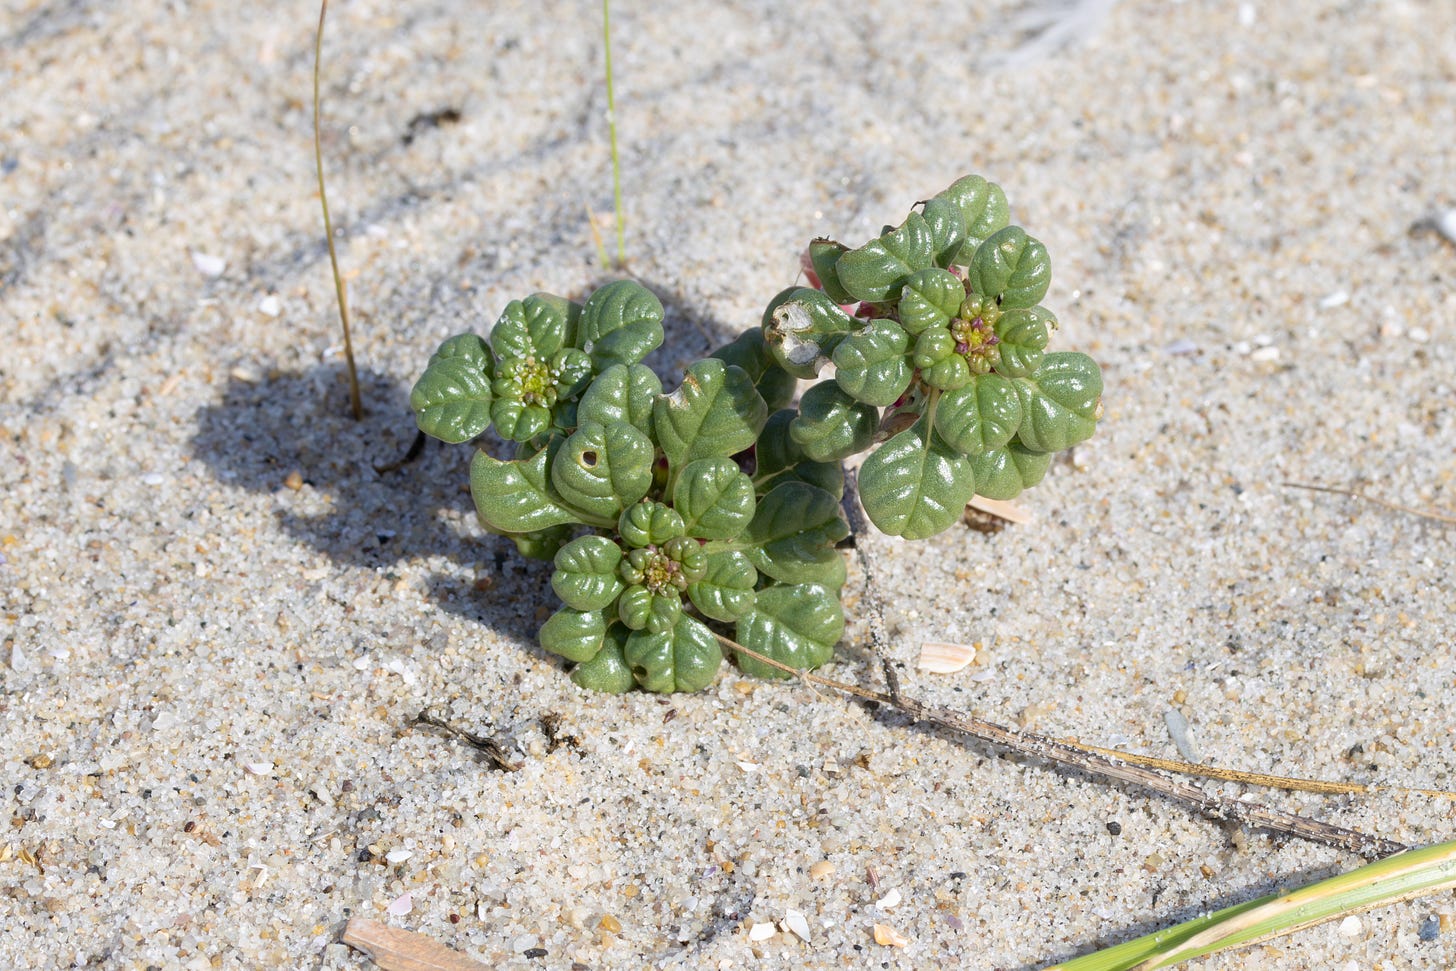 a seabeach amaranth plant with its glossy veined green leaves arranged in a circle around their stems facing the viewer, set against the sand.